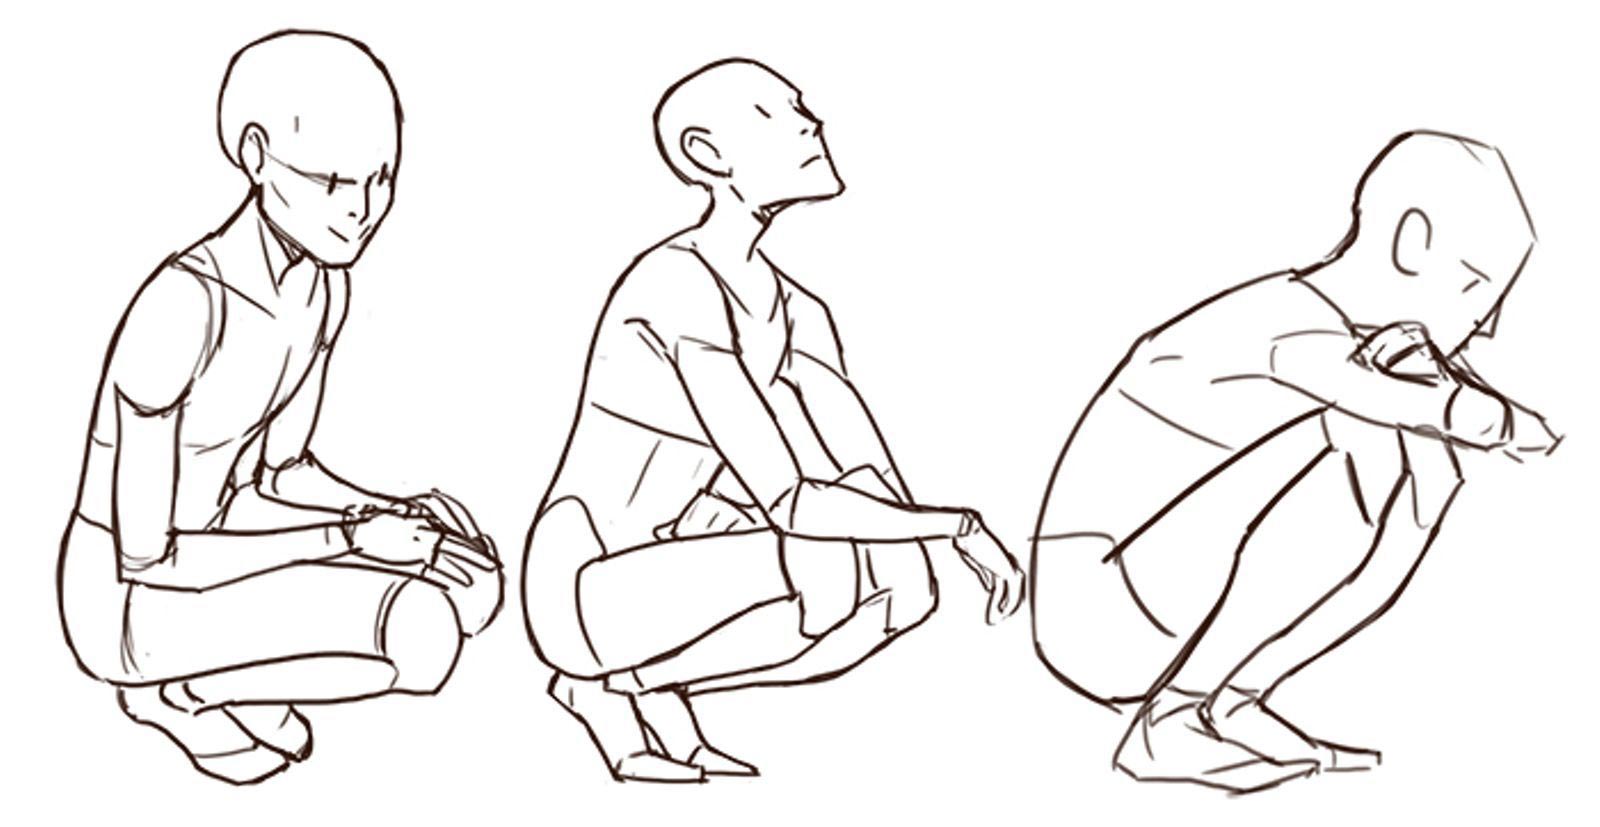 Squatting Drawing References.